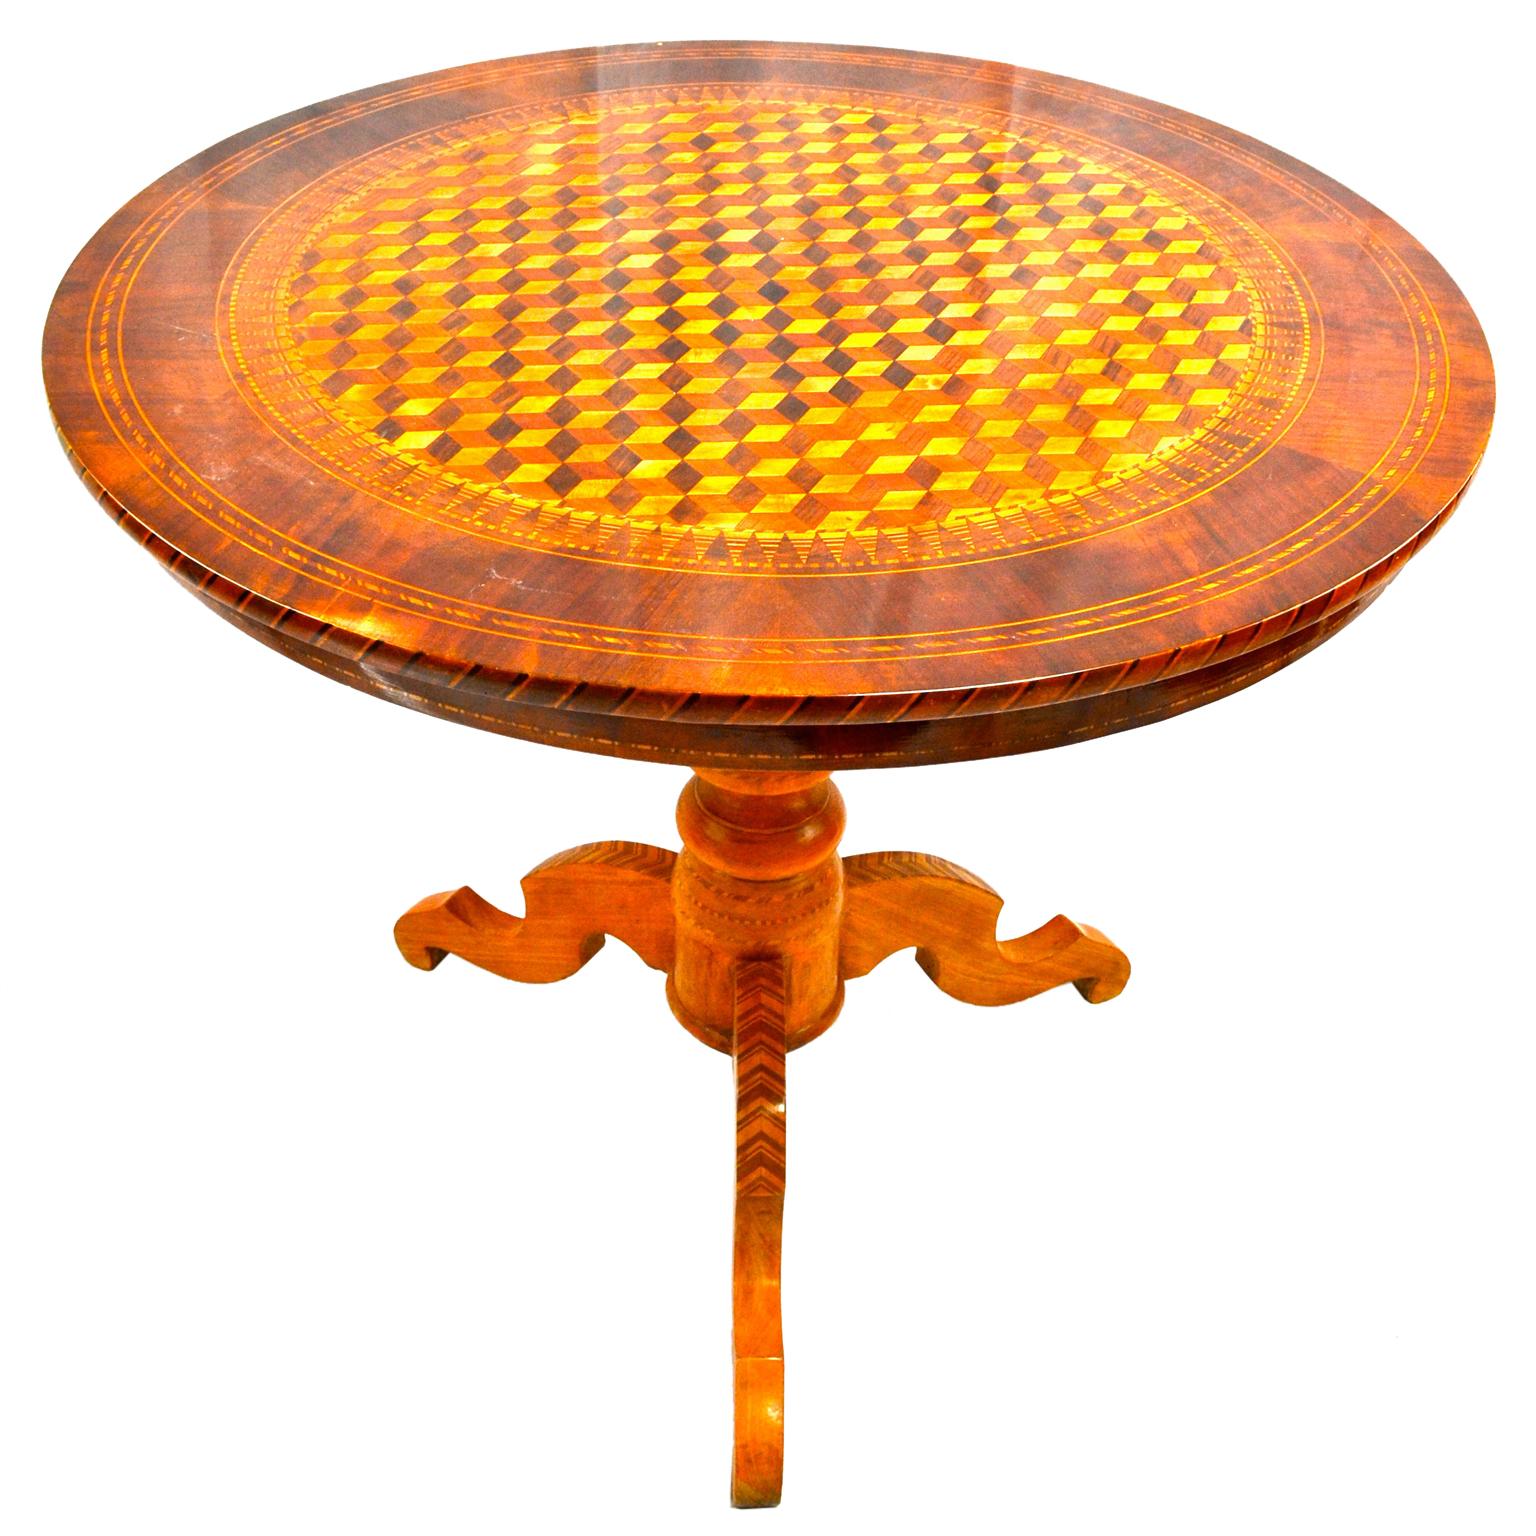 The circular top with striking geometric inlay in three different woods creating an almost optical illusion of depth. The top rests on a turned inlaid column terminating in three splayed legs, also inlaid. The city of Sorrento on the Amalfi Coast in